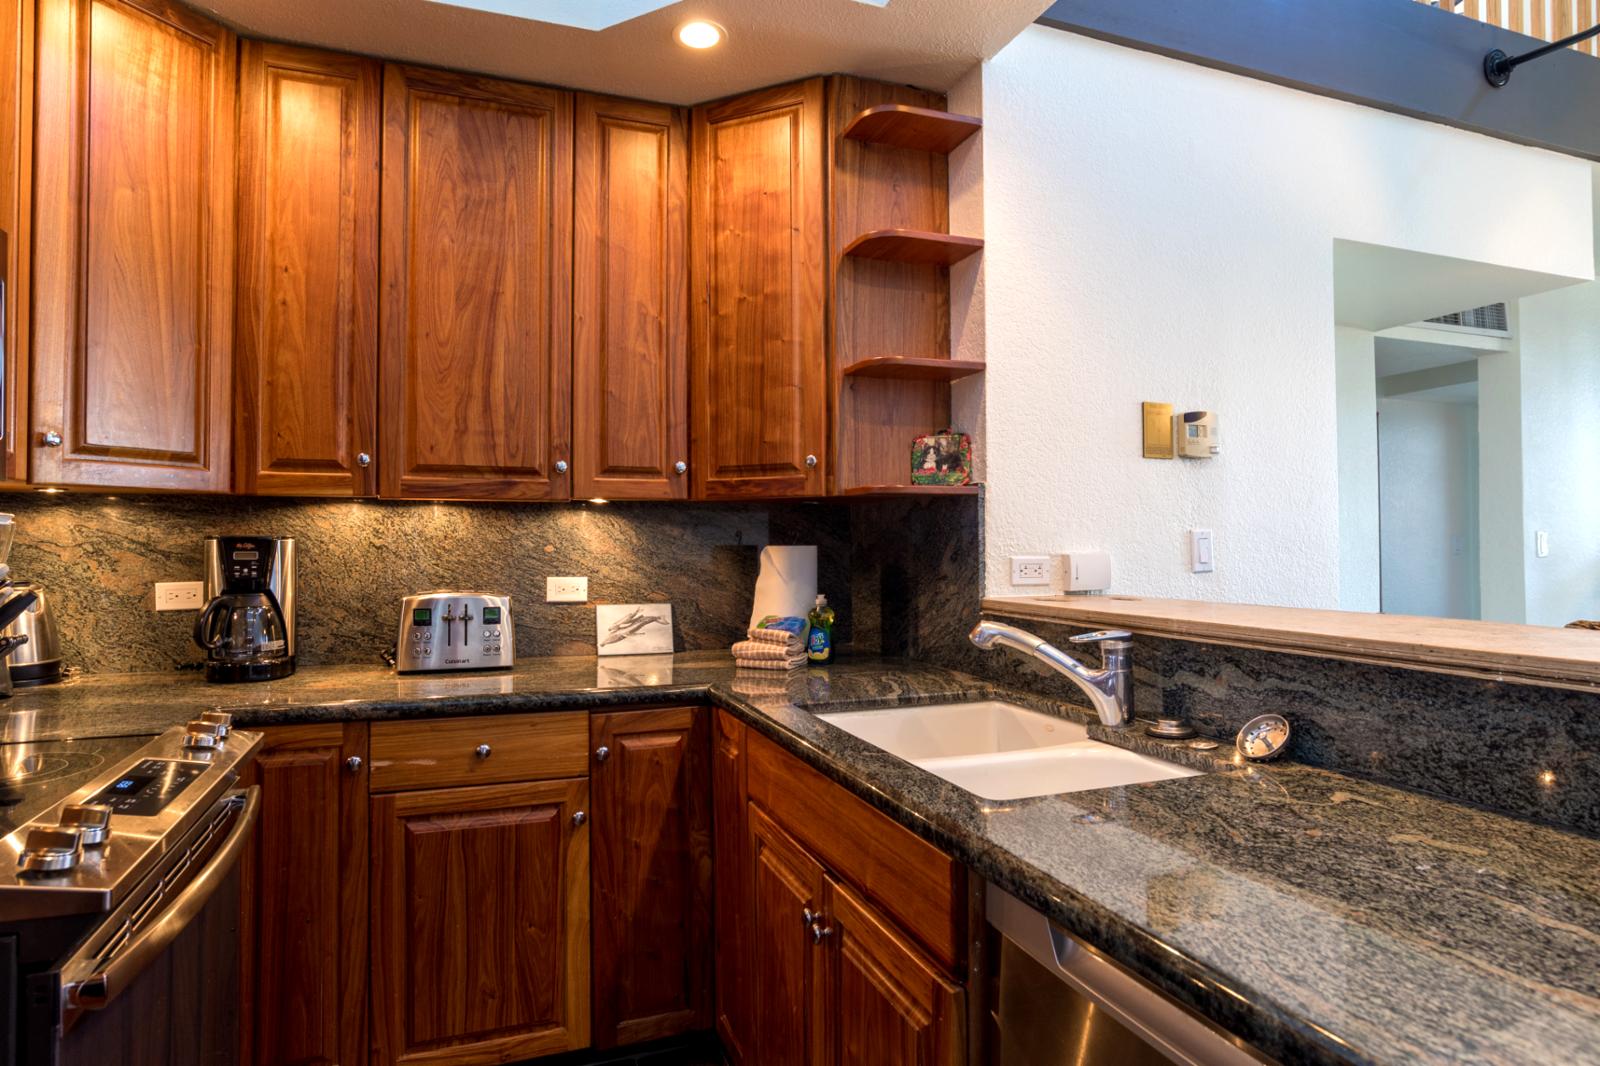 Modern accents and NEW custom countertops